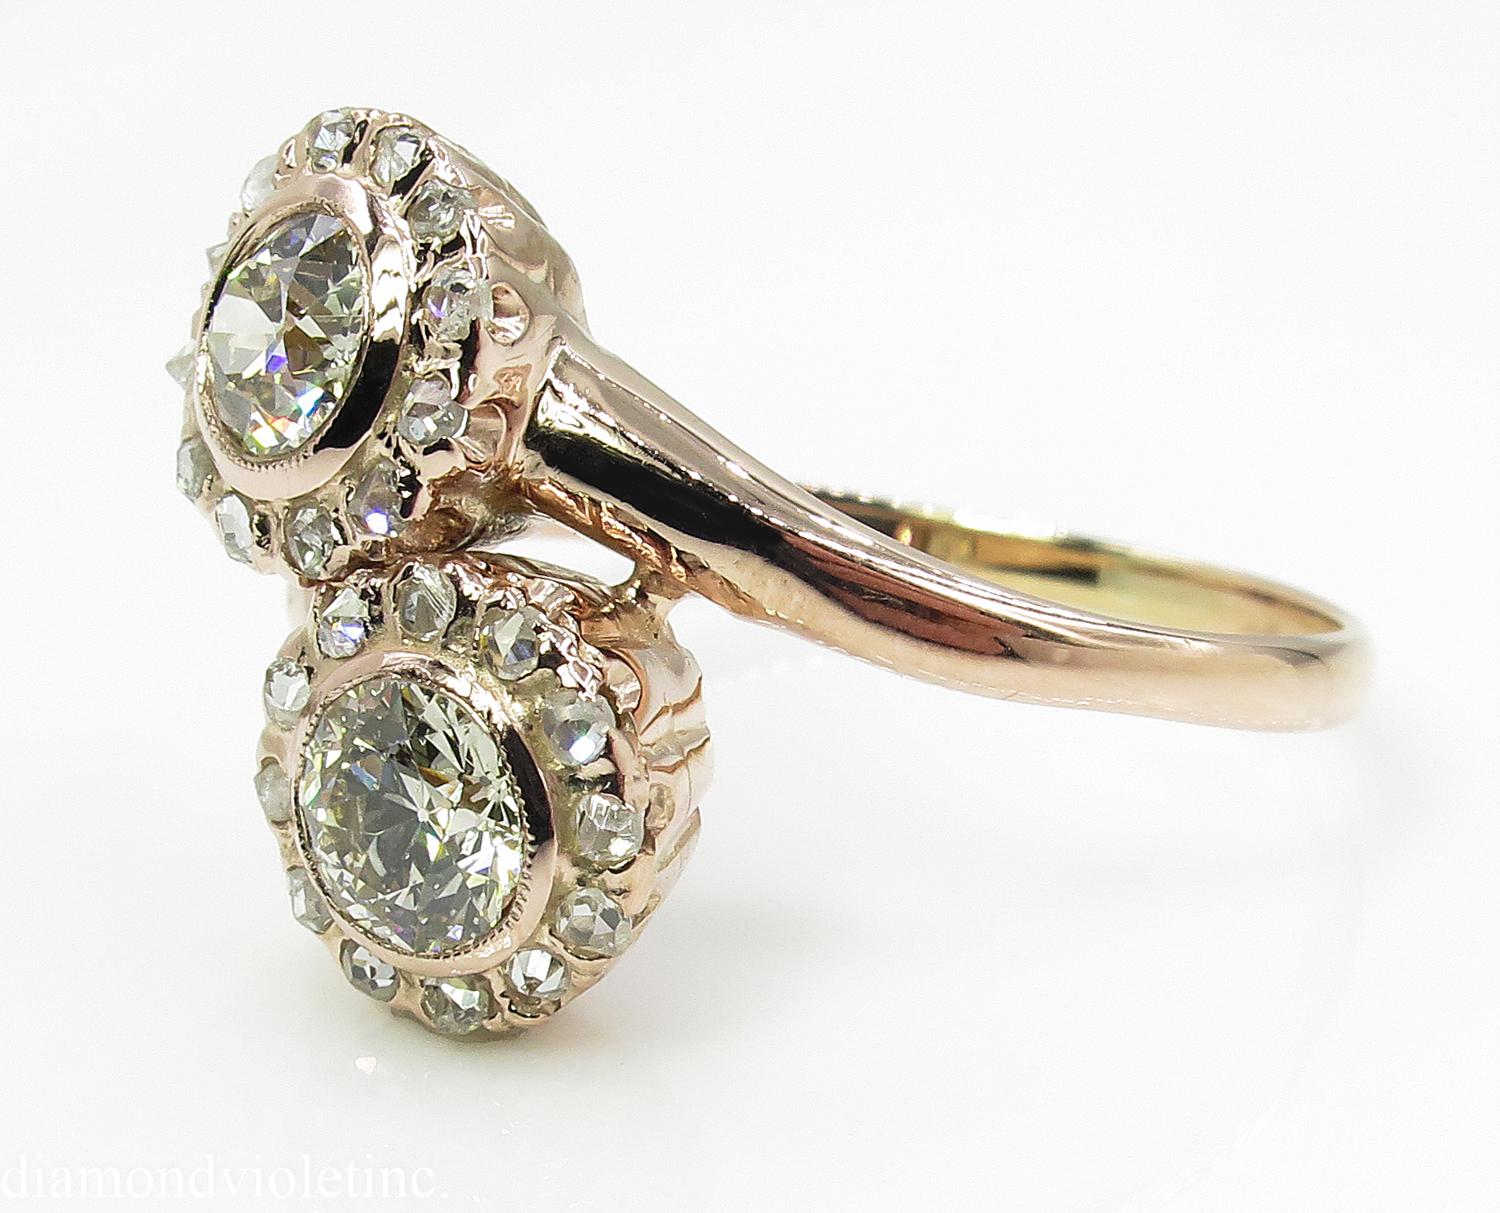 An Estate Vintage BEAUTIFUL CROSSOVER Diamond Engagement, Anniversary, Wedding or Right Hand Ring! The ring contains Two Large Gemologic Appraised Old European Diamonds in J-K color, VS2-SI1 clarity. Super Bright and Brilliant! The Total Weight of